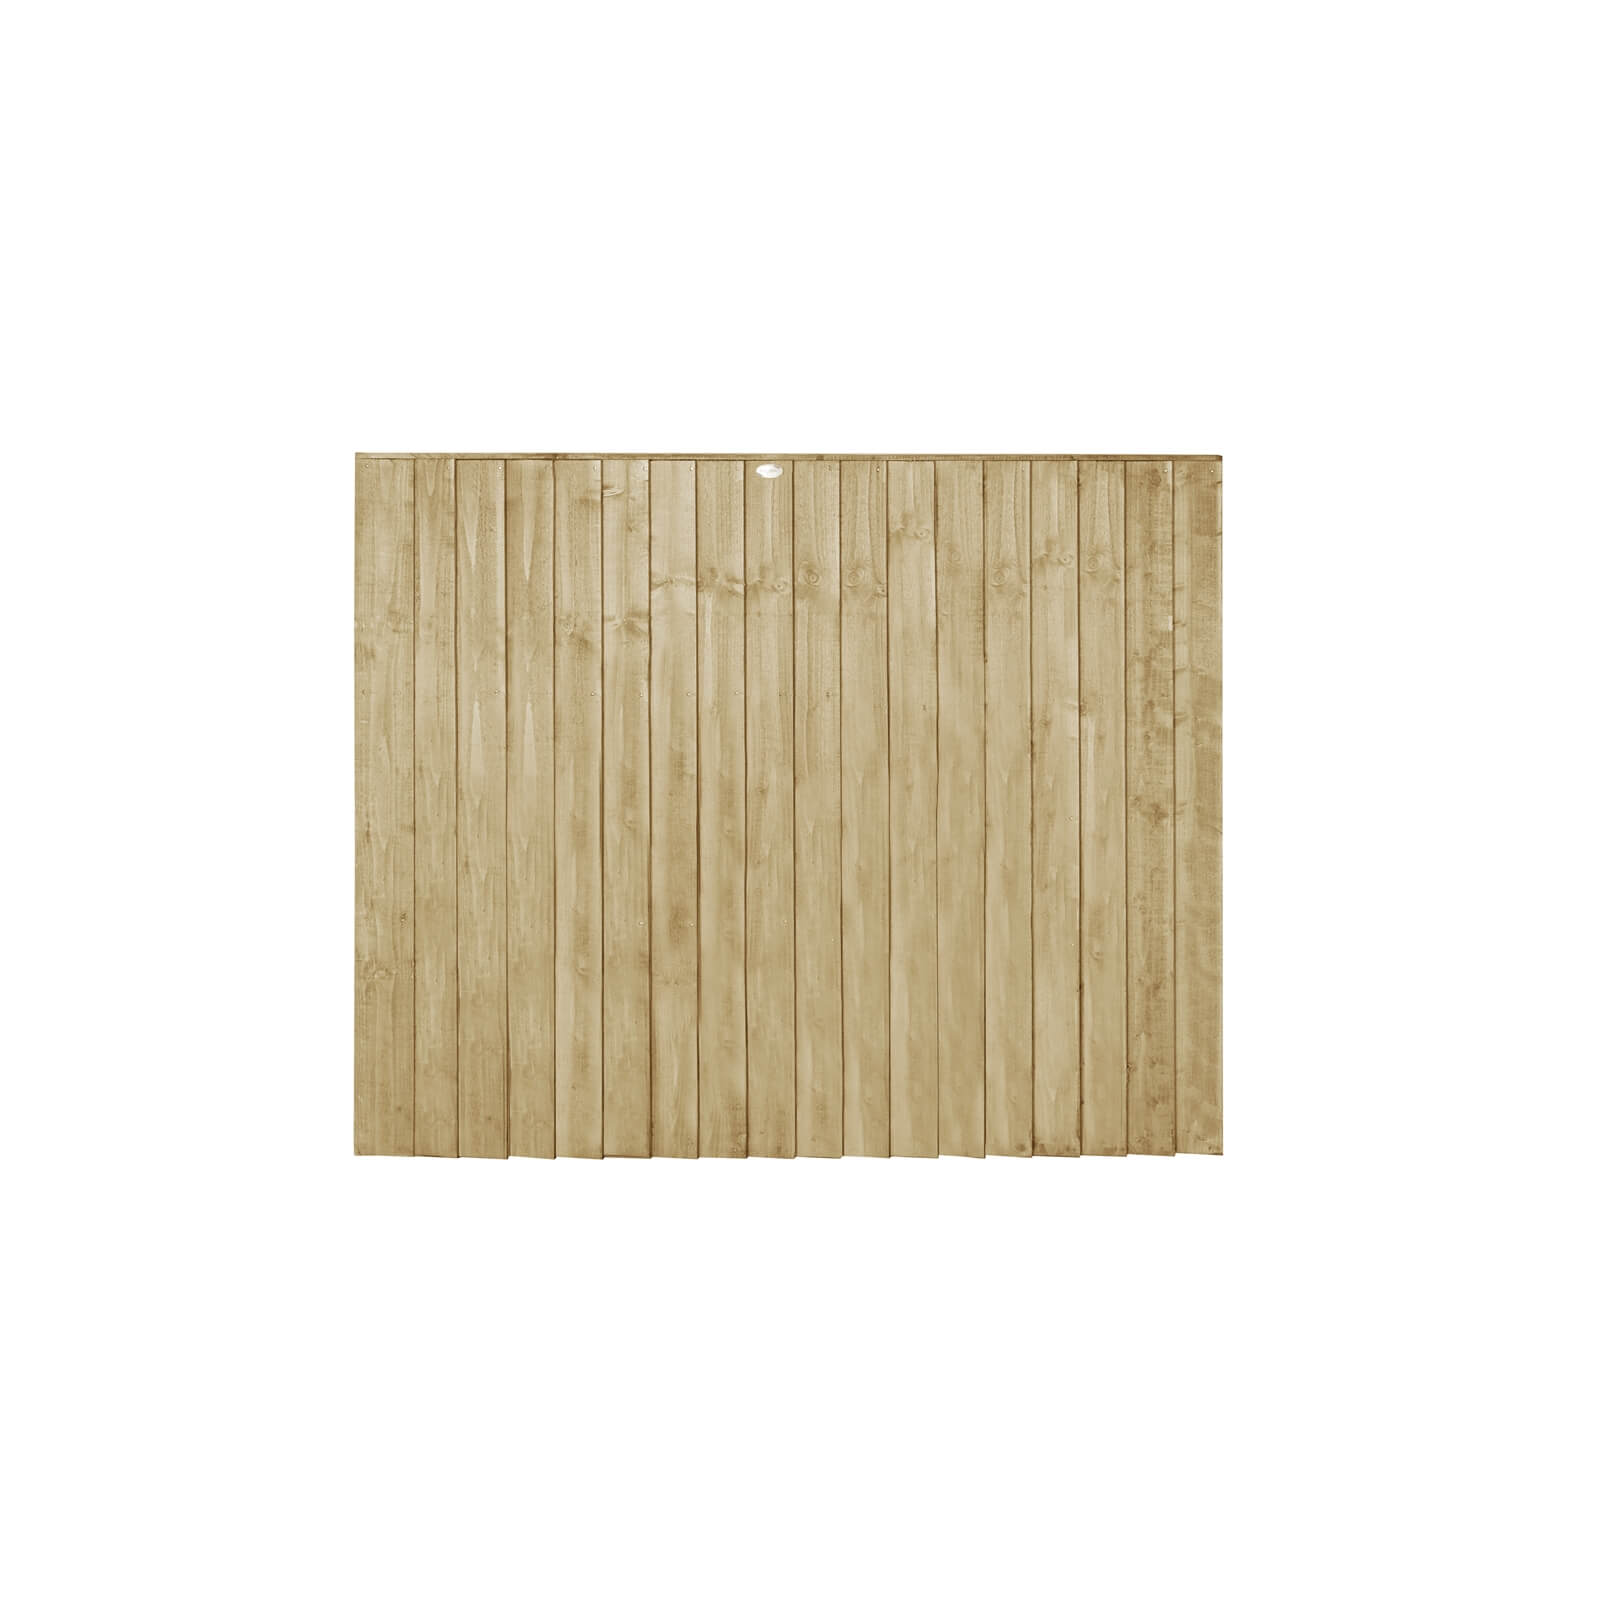 6ft x 5ft (1.83m x 1.54m) Pressure Treated Featheredge Fence Panel - Pack of 4